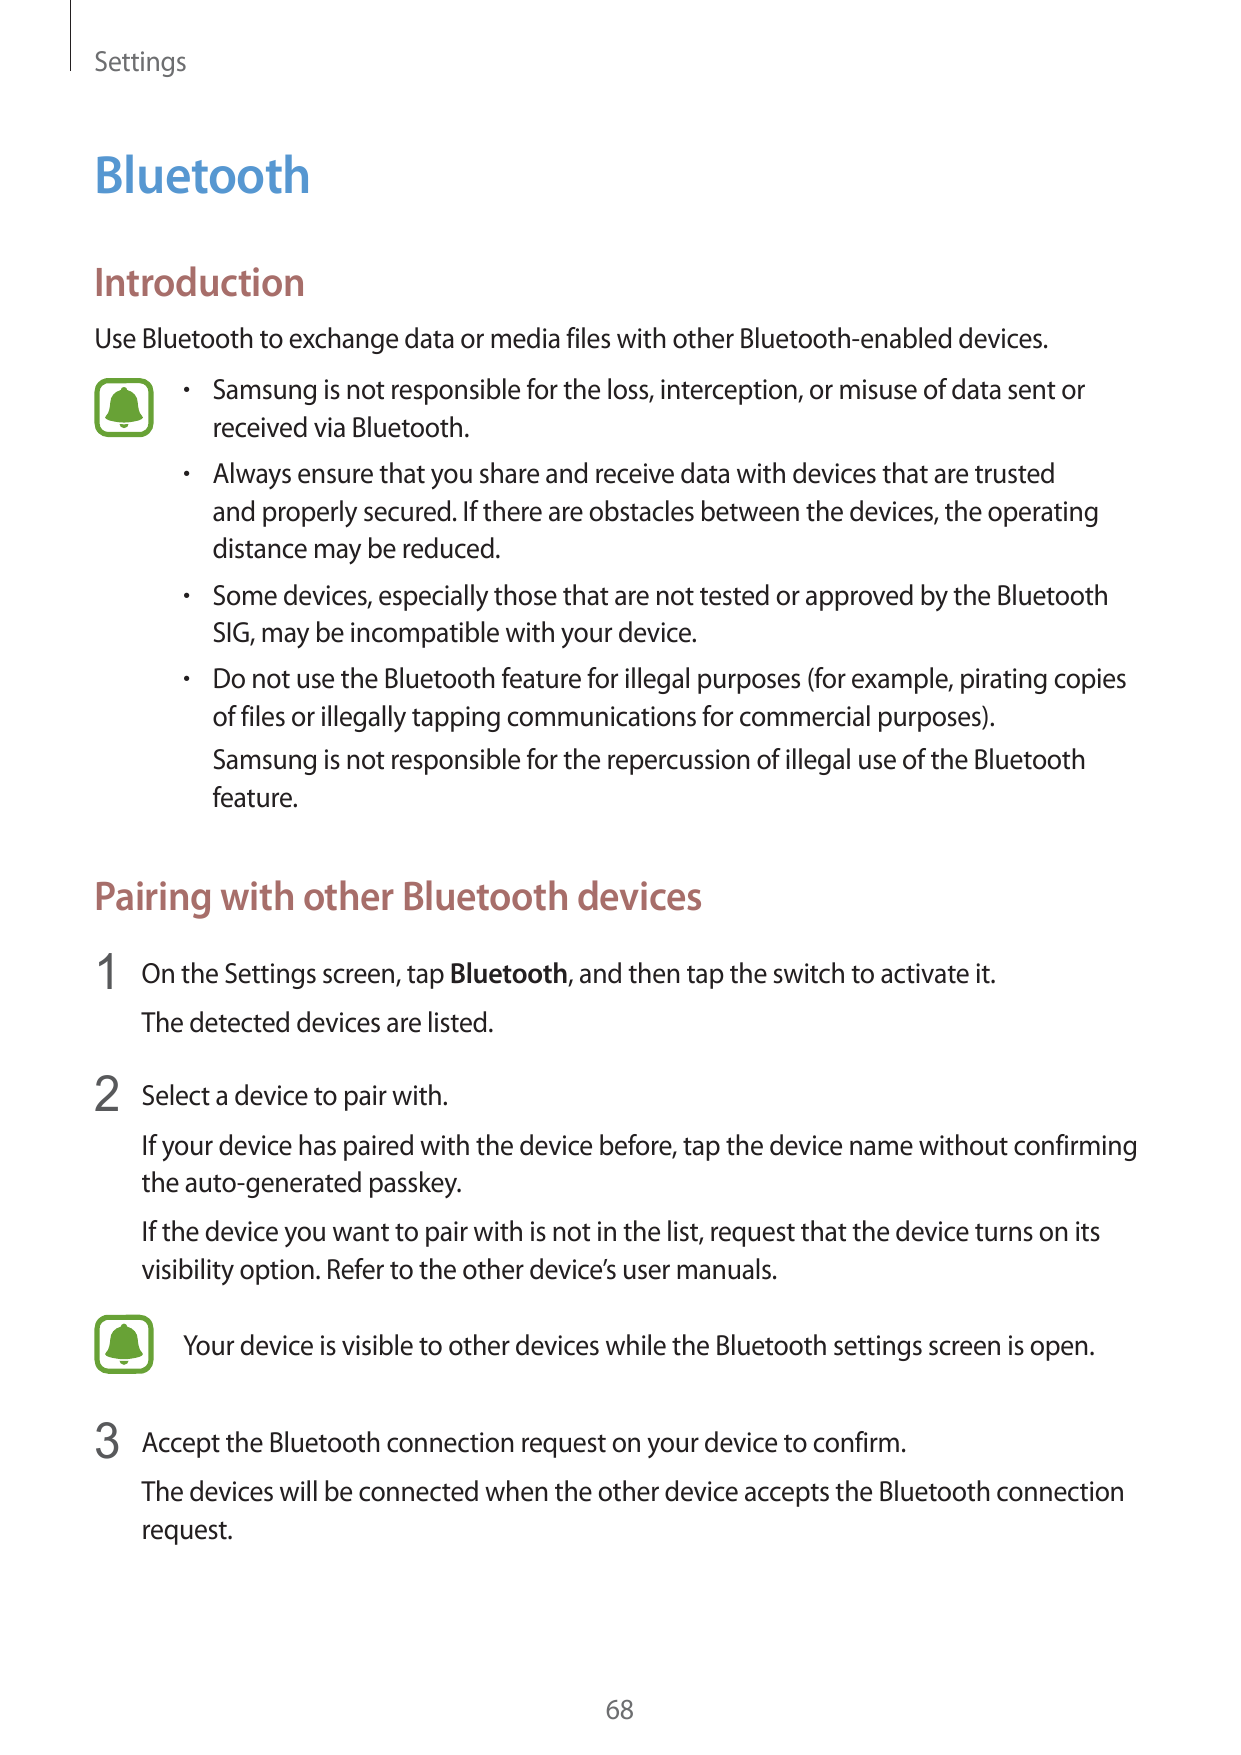 SettingsBluetoothIntroductionUse Bluetooth to exchange data or media files with other Bluetooth-enabled devices.r Samsung is not